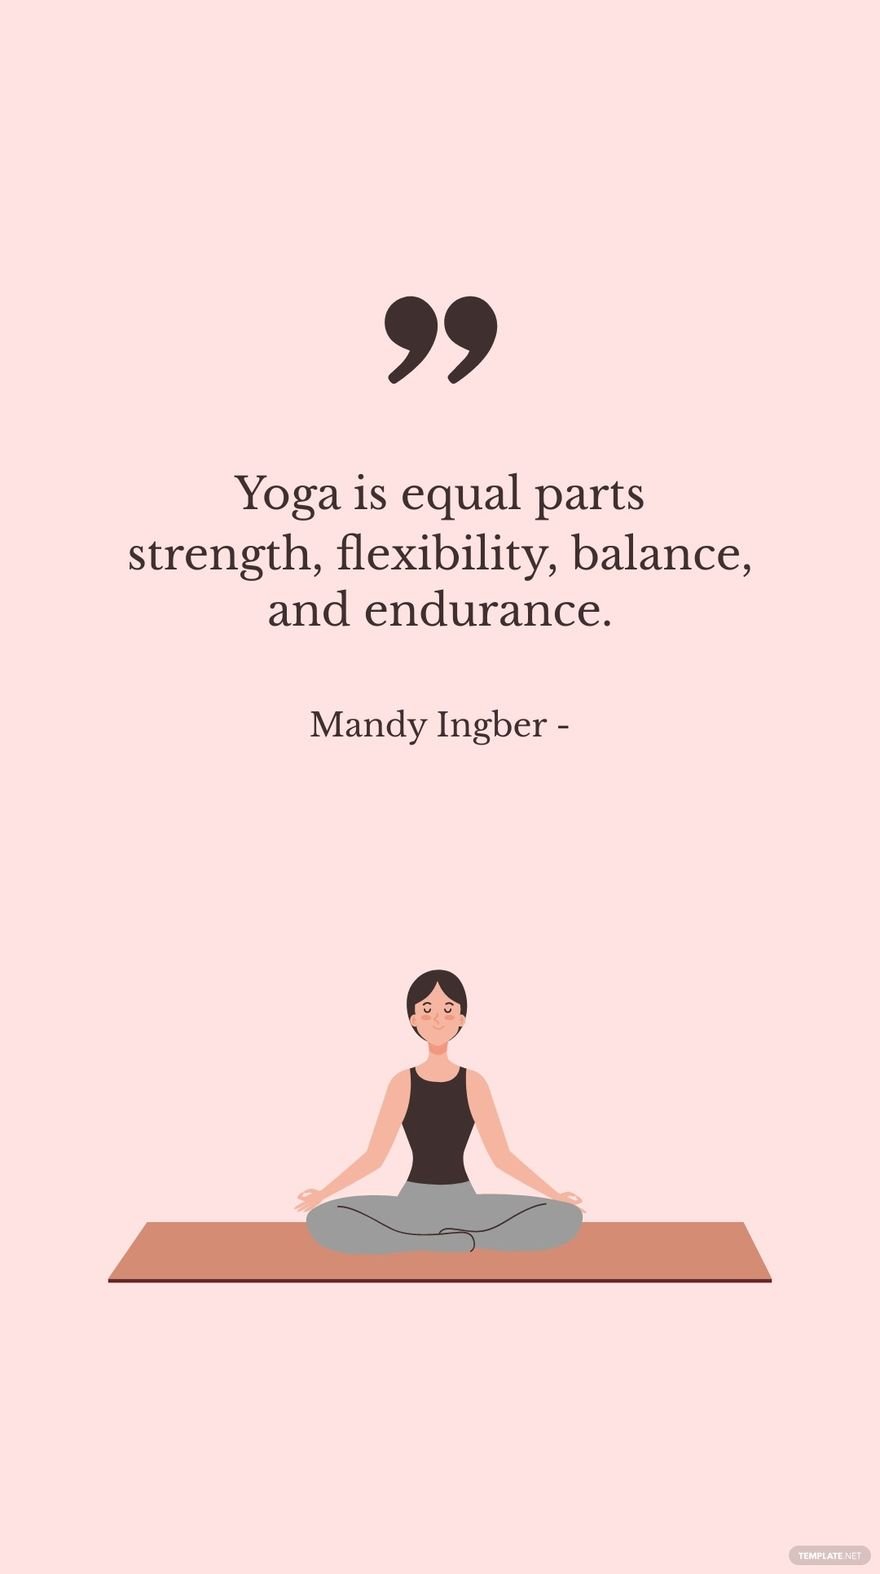 Free Mandy Ingber - Yoga is equal parts strength, flexibility, balance, and endurance. in JPG